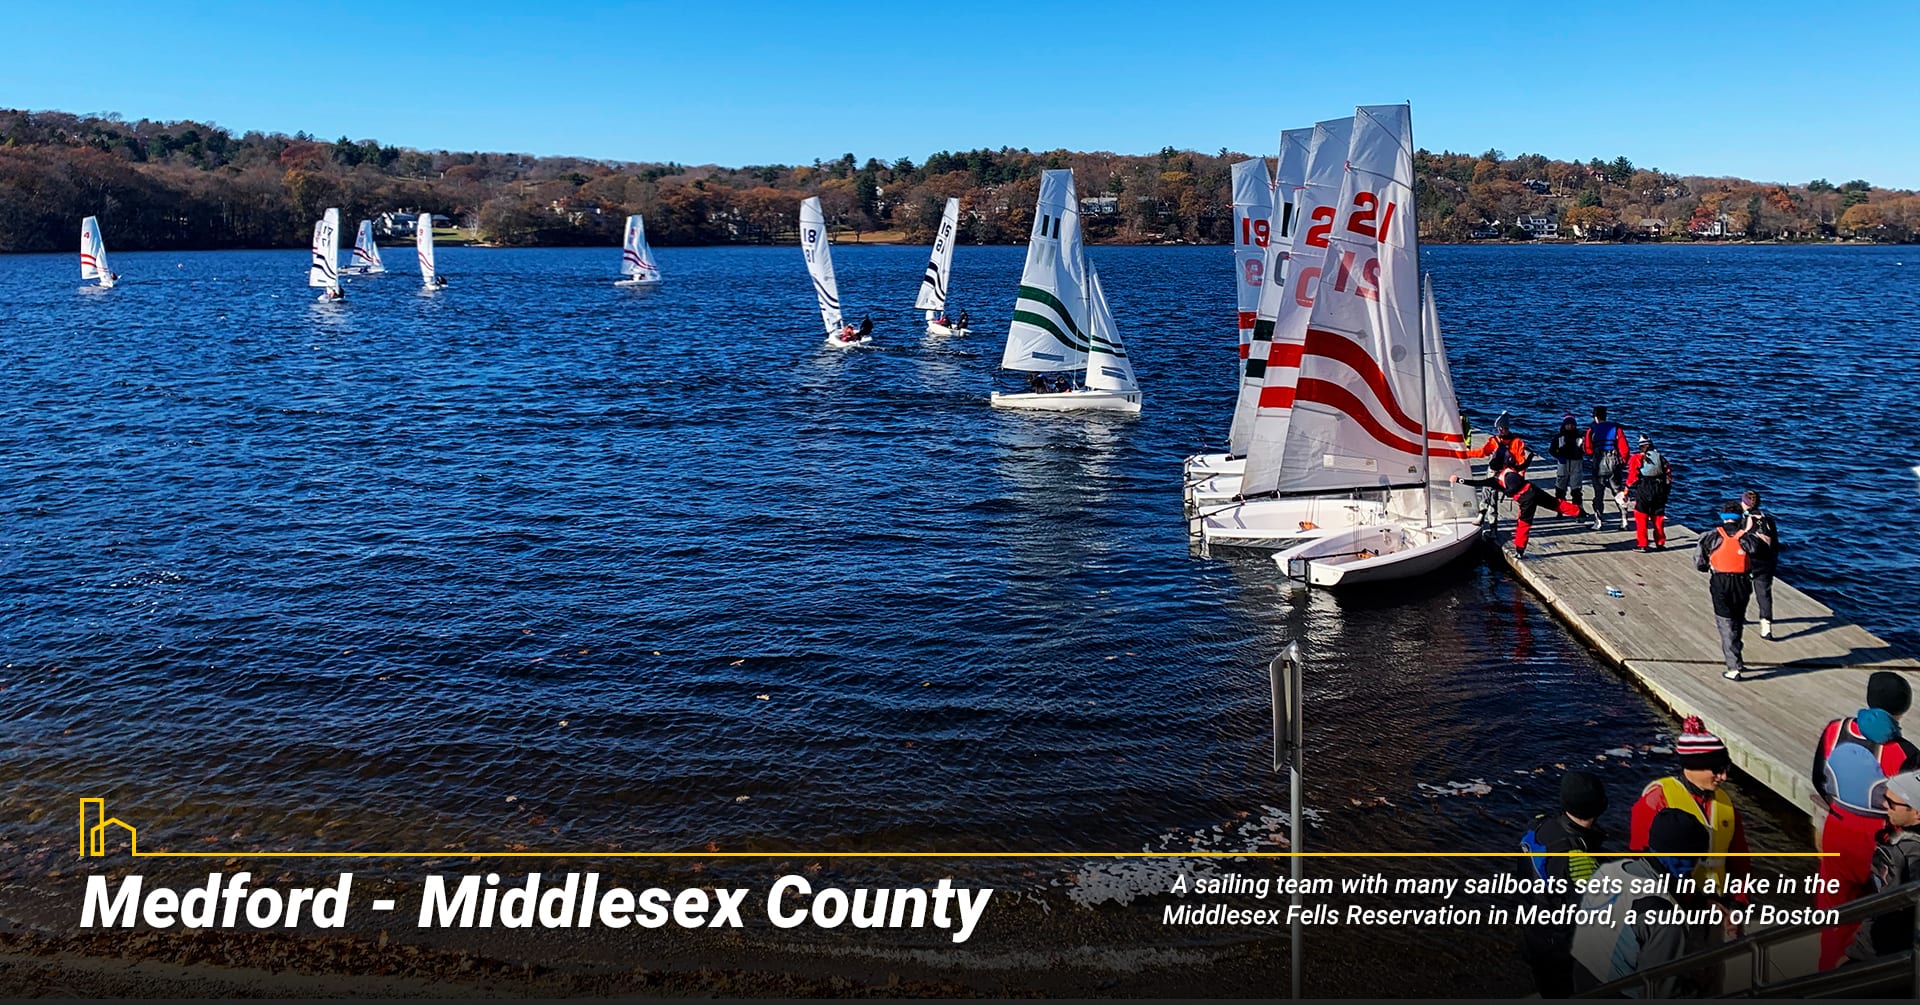 Medford - Middlesex County